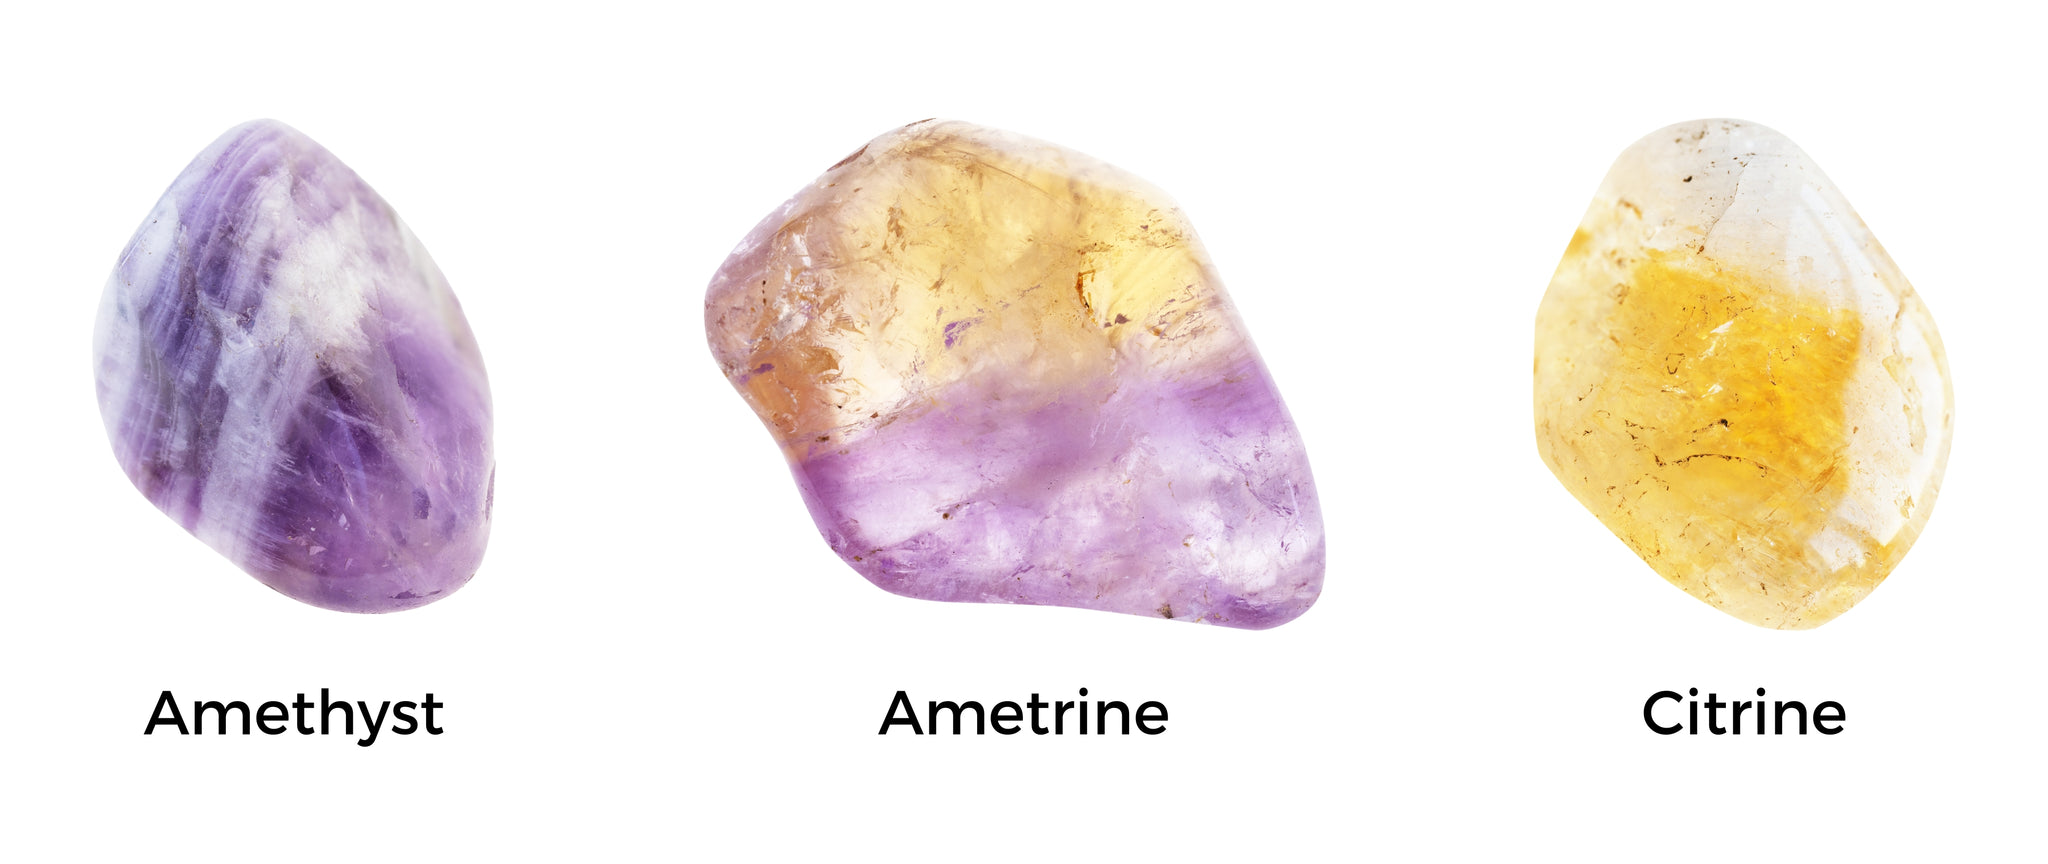 From left to right, imaged is Amethyst Tumbled Stone, Ametrine Tumbled Stone, and Citrine Tumbled Stone. This shows the gradual colour change from Purple (amethyst) to orange (citrine).